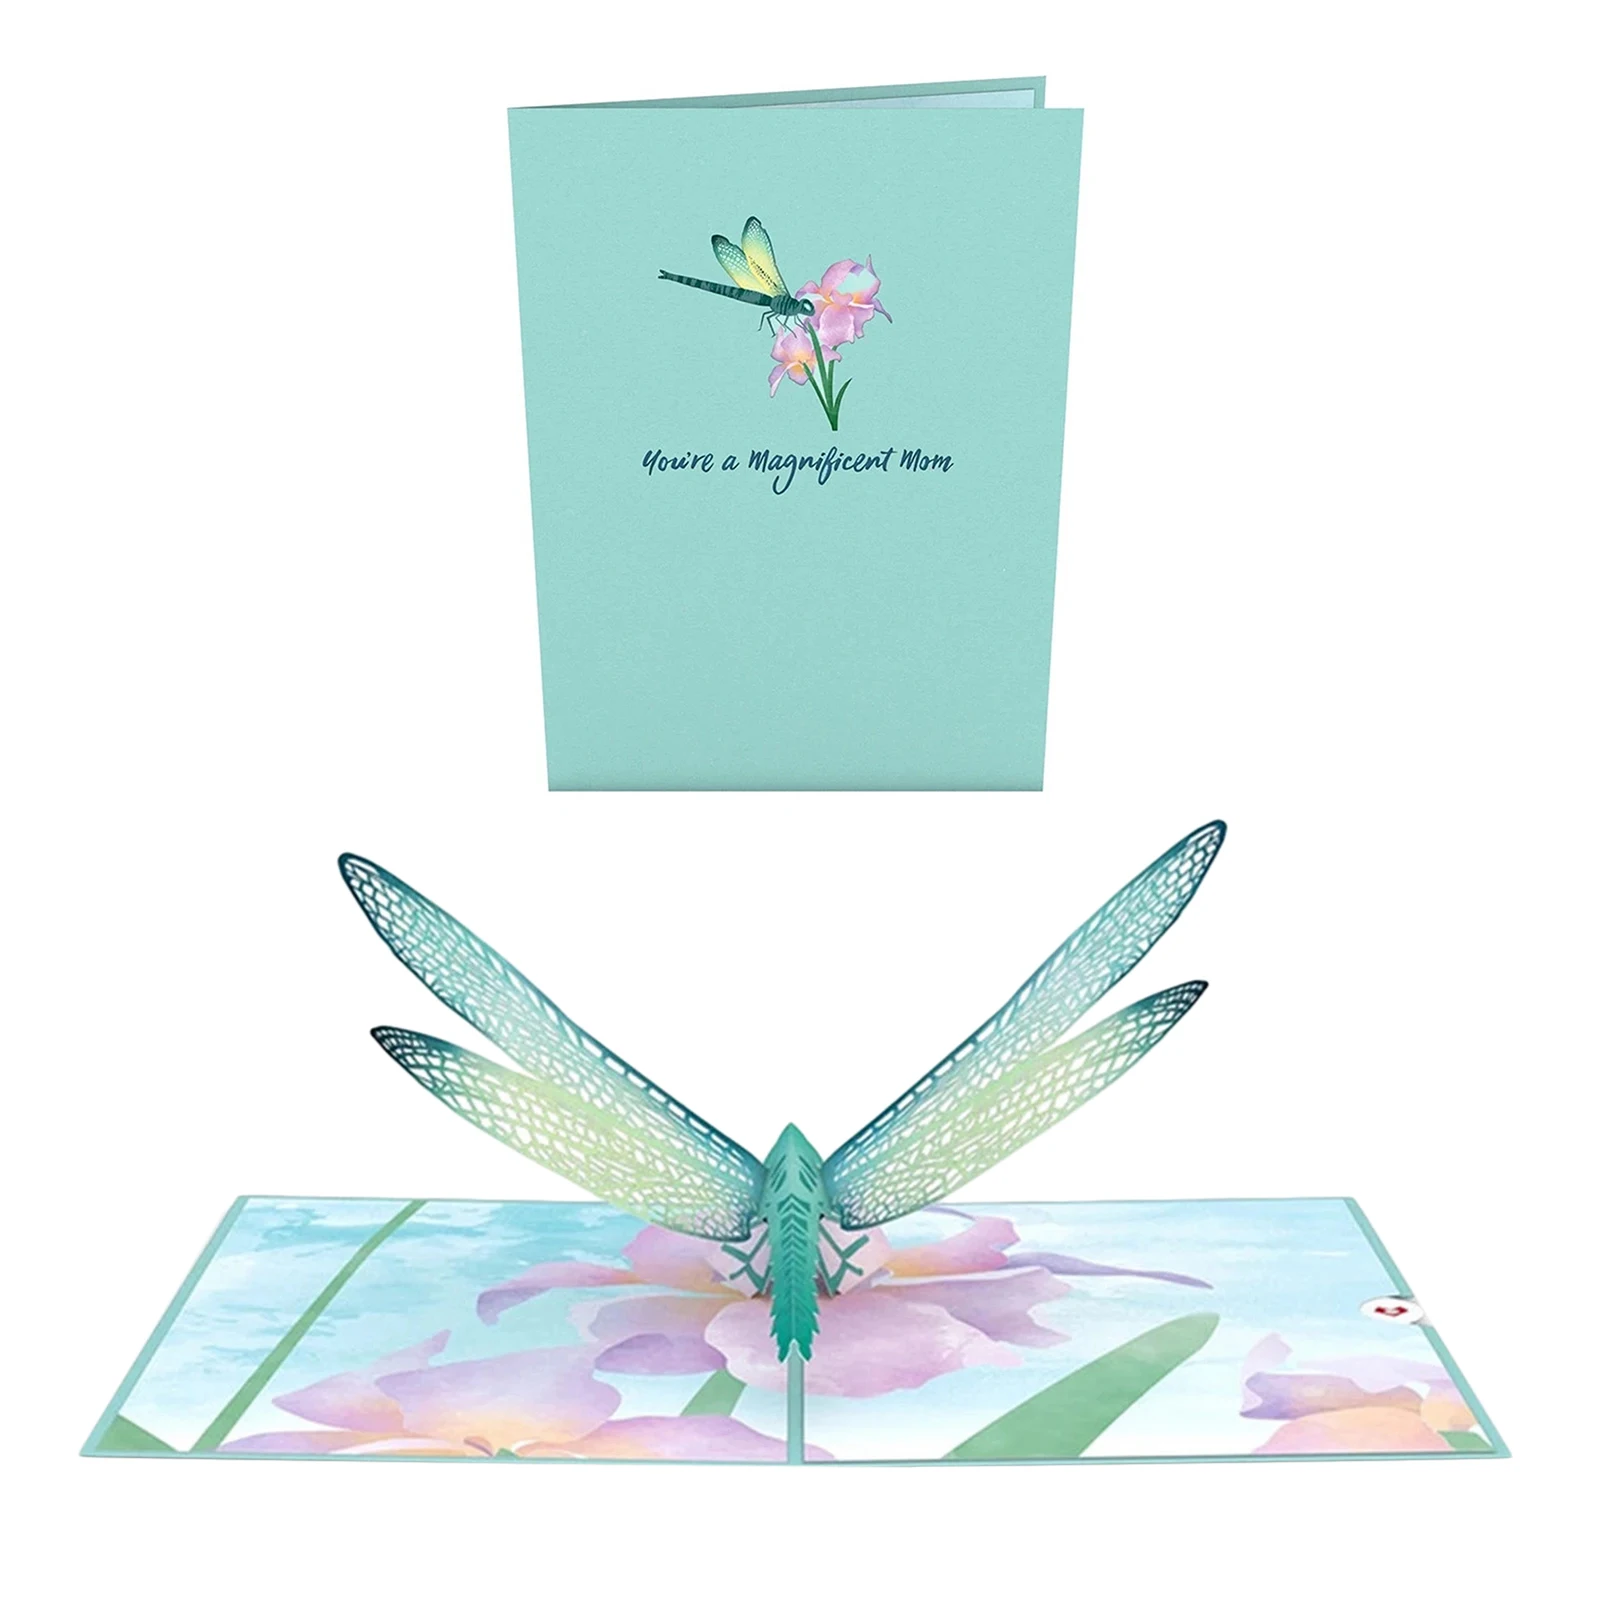 3D Dragonfly Pop Up Greeting Card Valentine's Day Gifts for Girlfriend Christmas Wedding Postcard